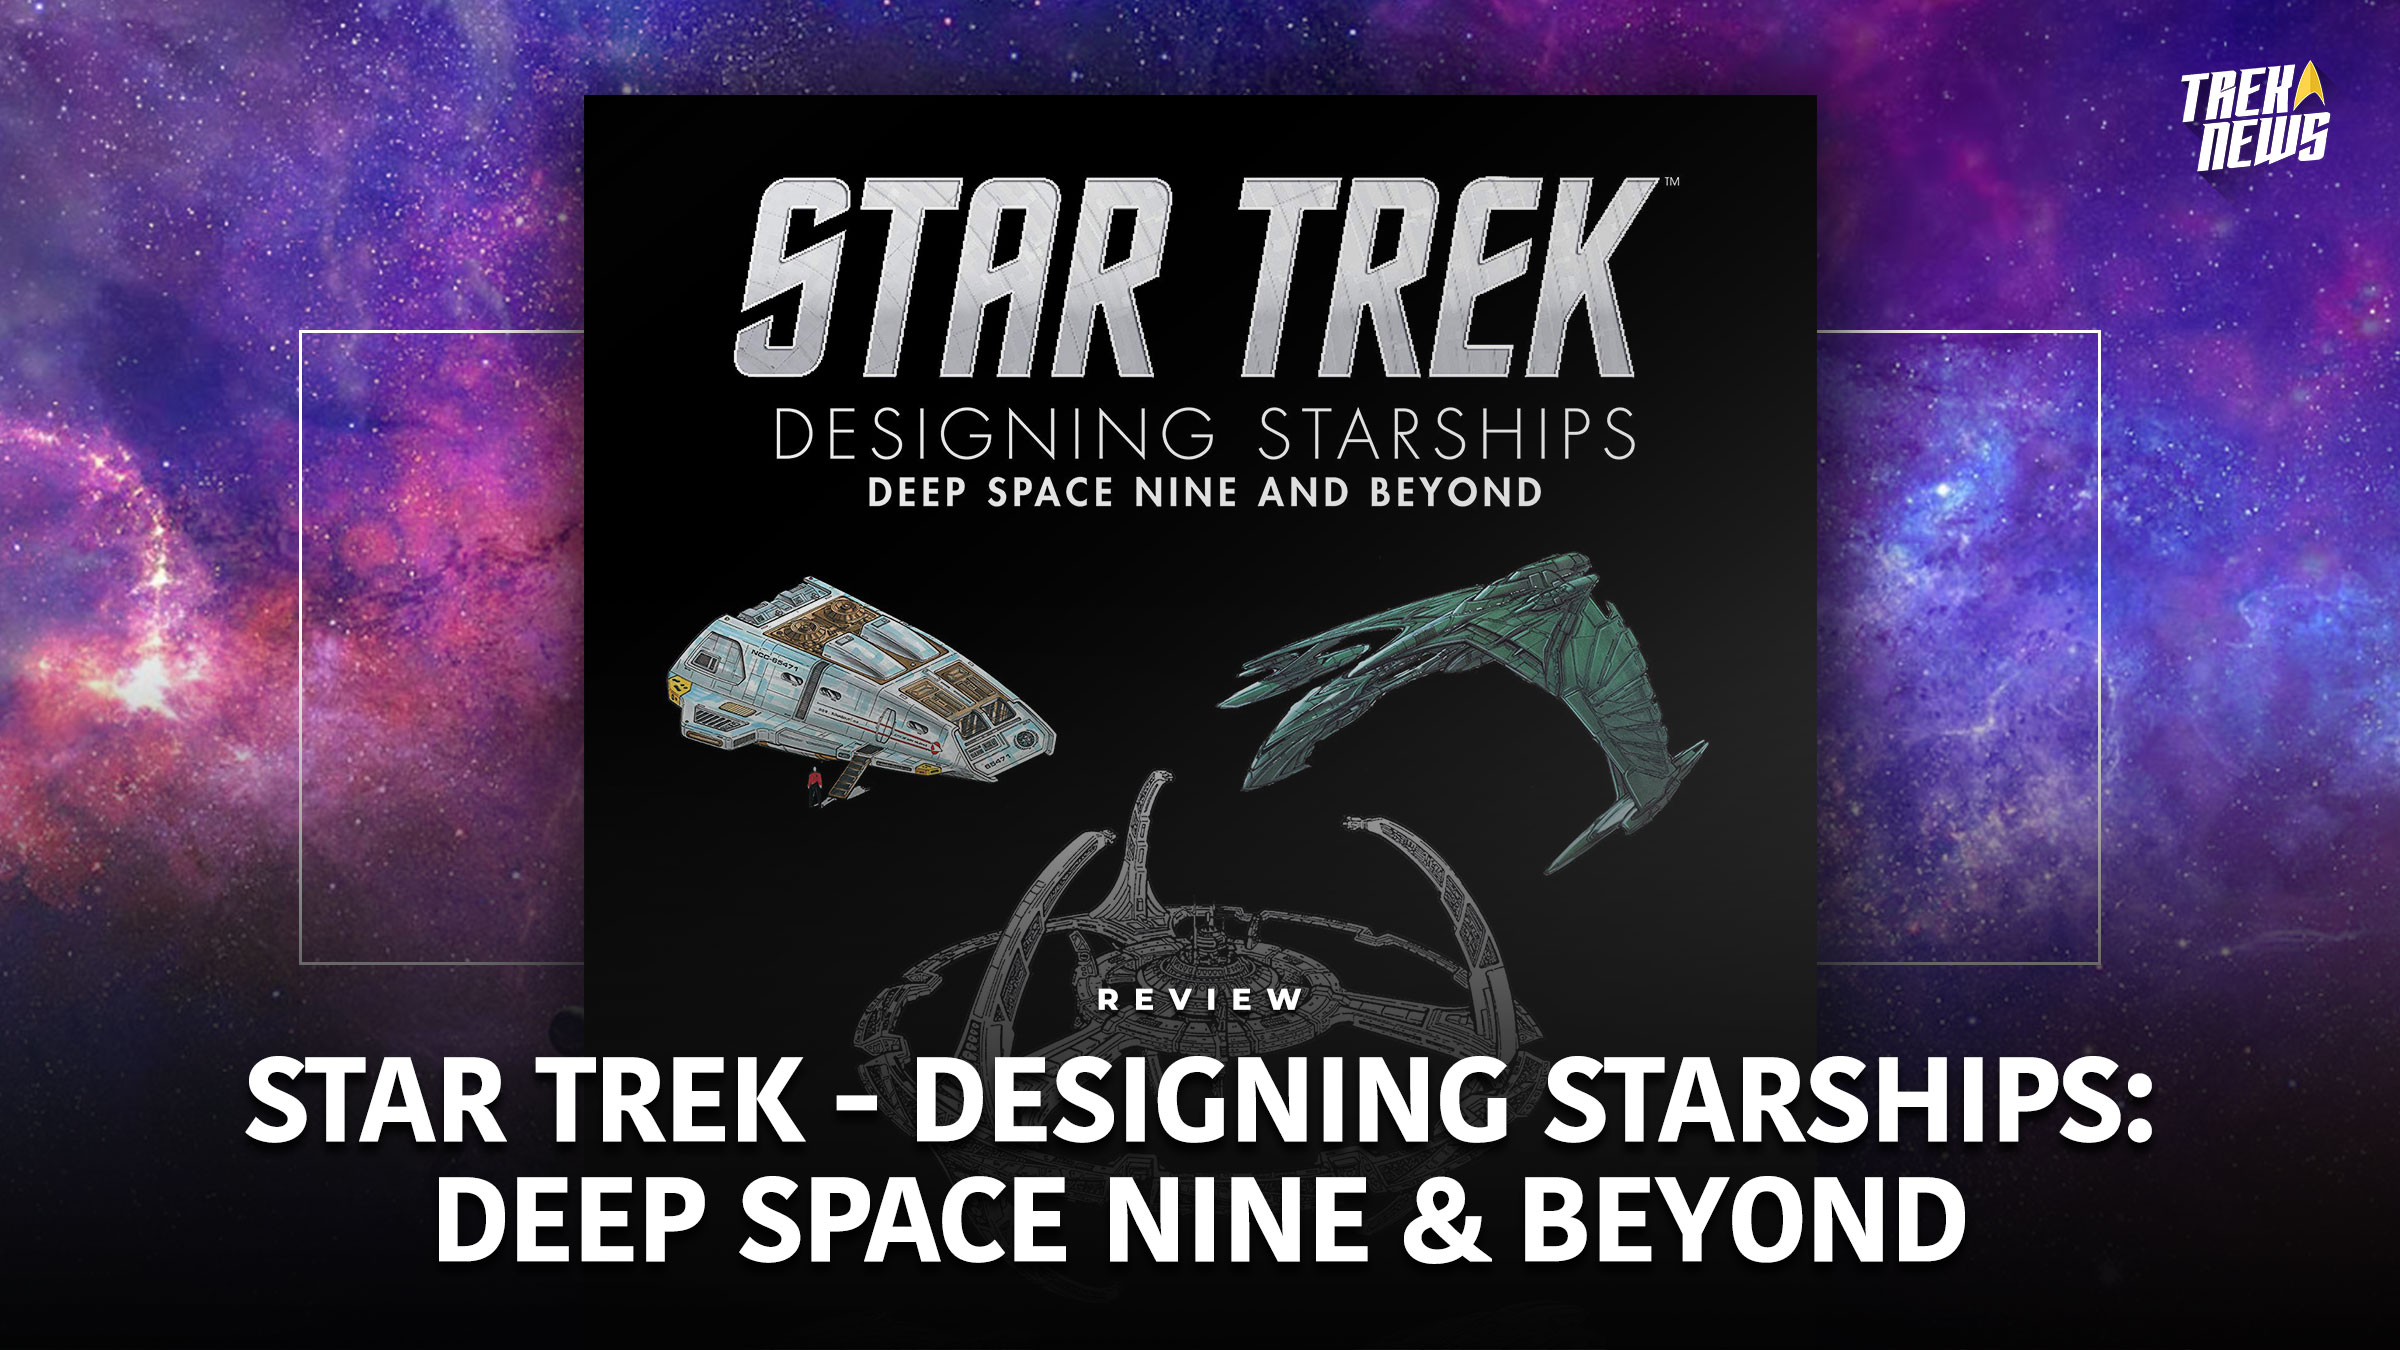 Star Trek Designing Starships: Deep Space Nine & Beyond Review: New Book Takes A Deep Dive Into Shuttlecraft Of The Gamma Quadrant